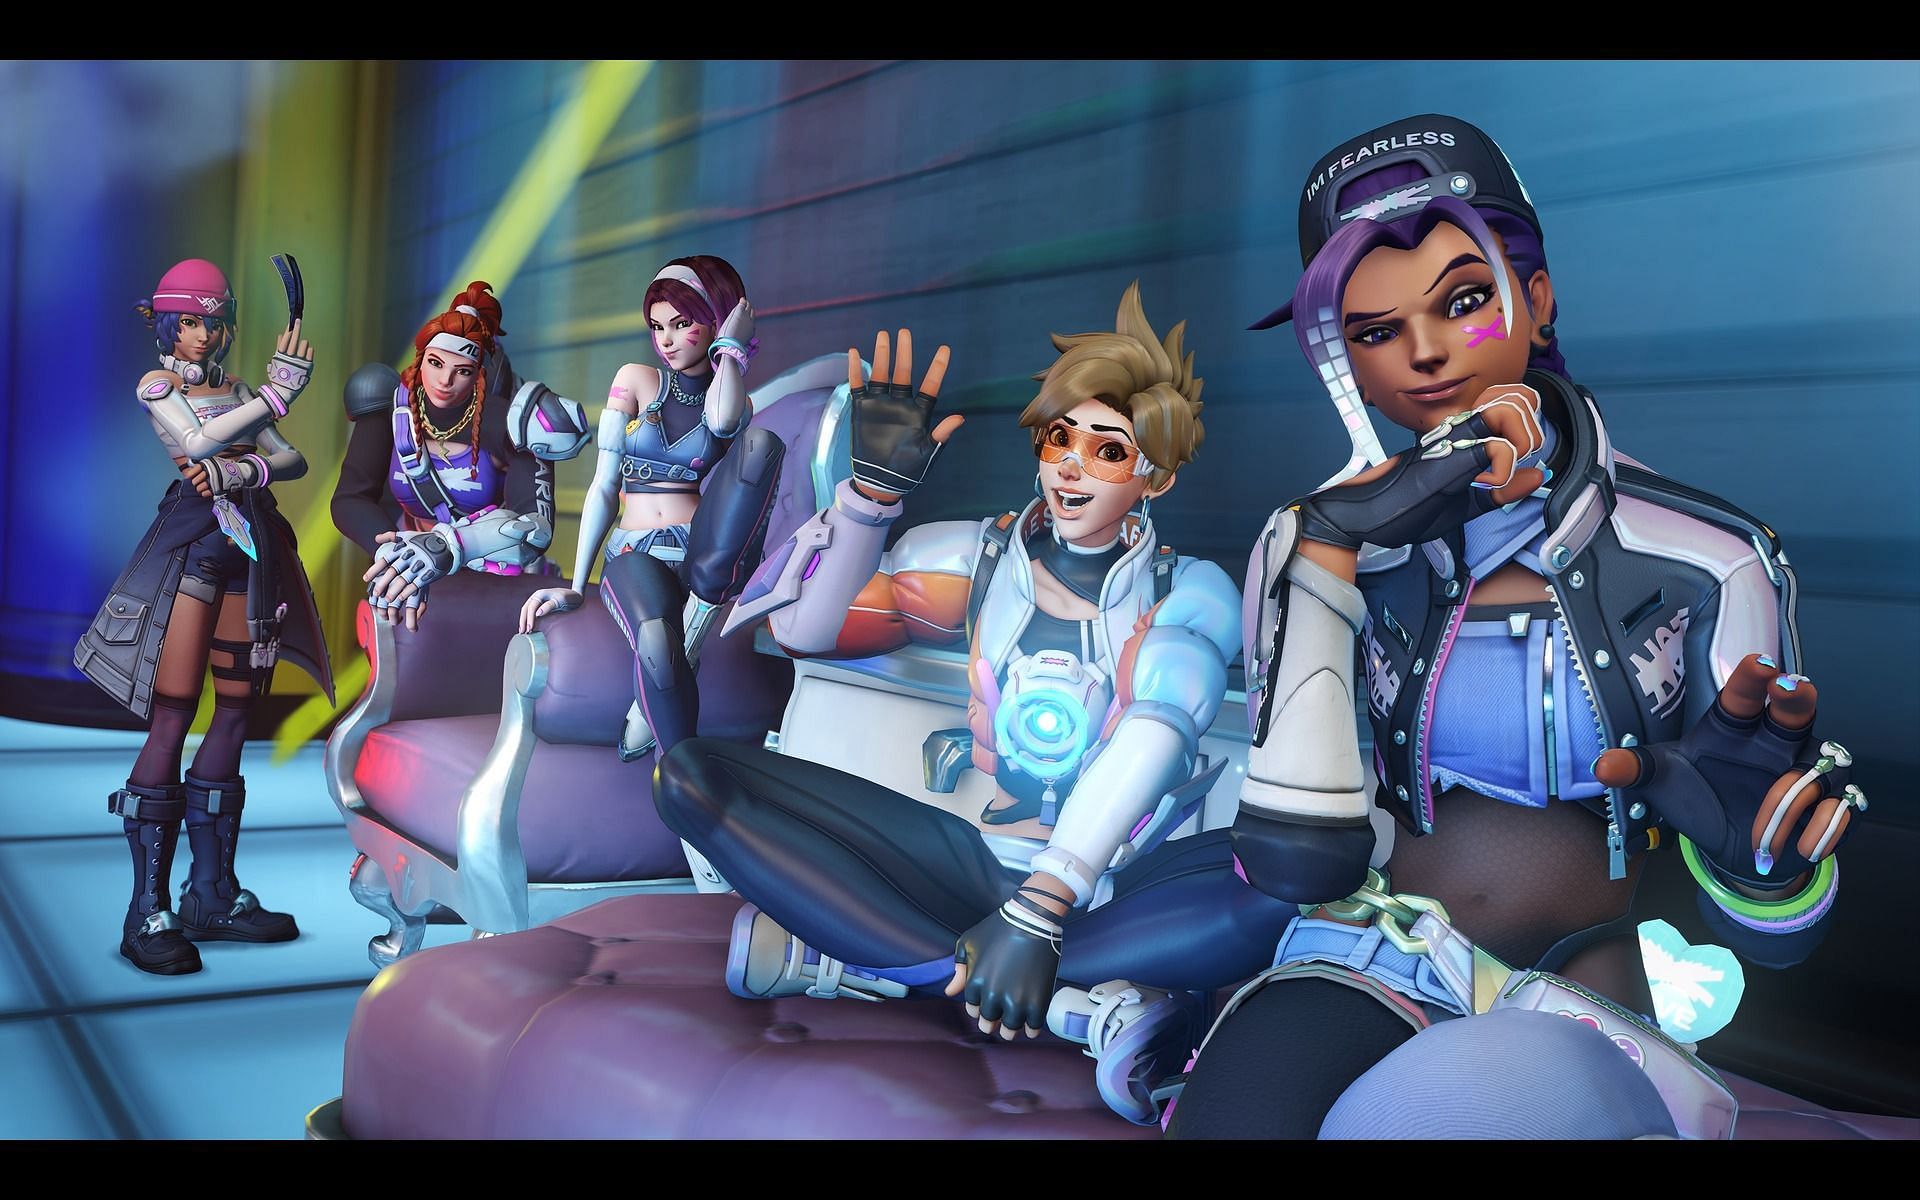 Grab A Free Legendary Tracer Skin In Overwatch 2 For A Limited